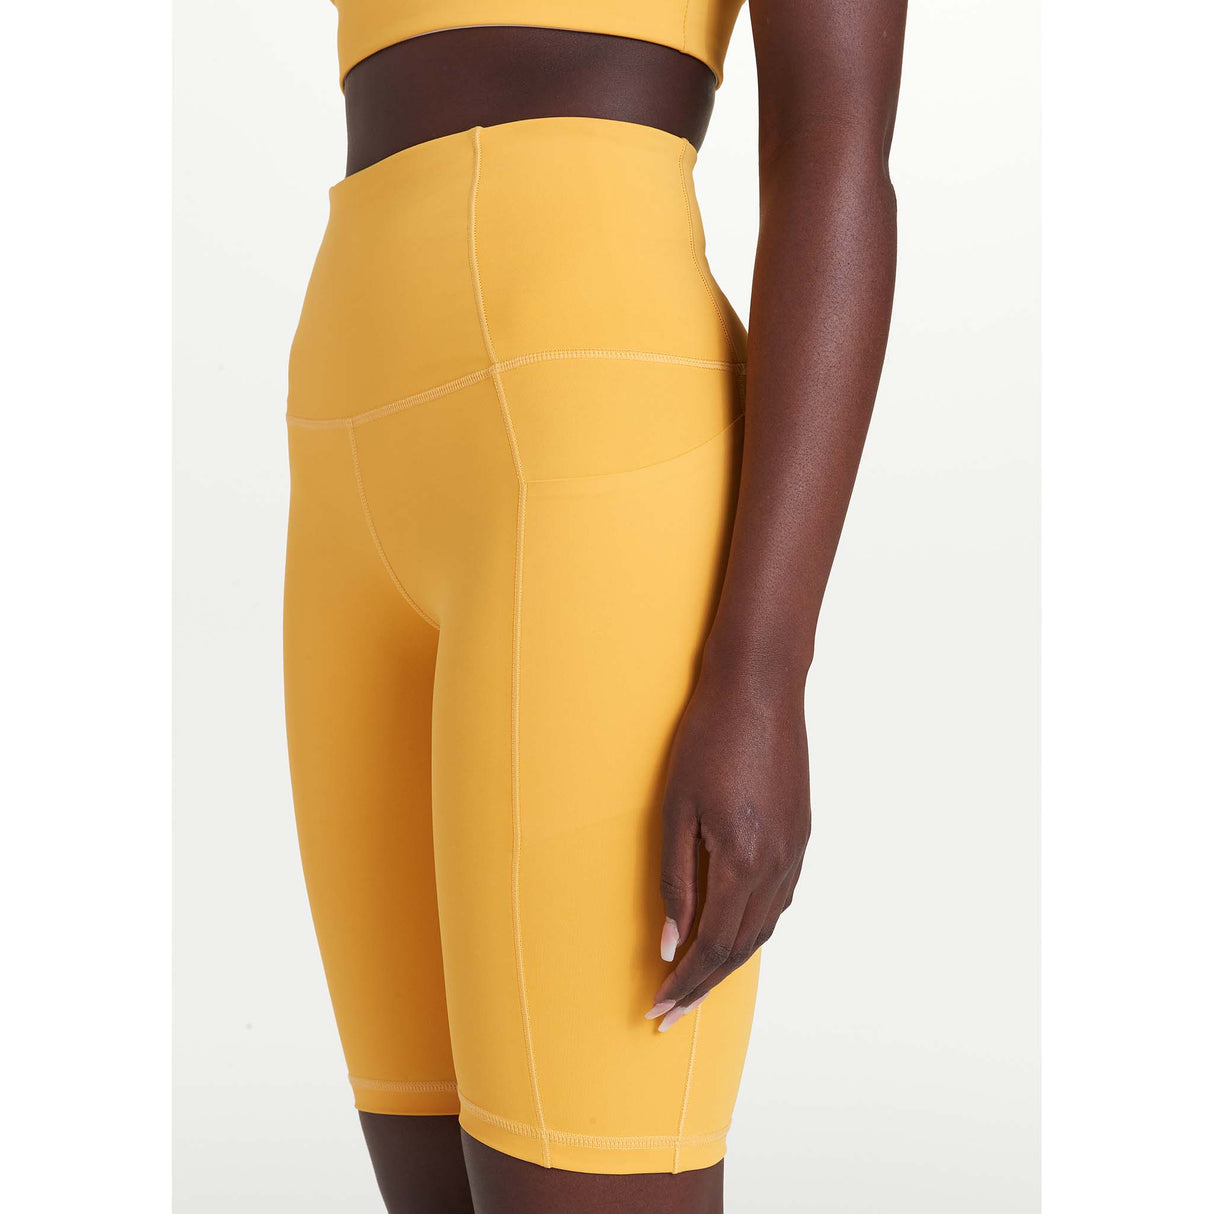 Lole Step Up short marigold femme lateral